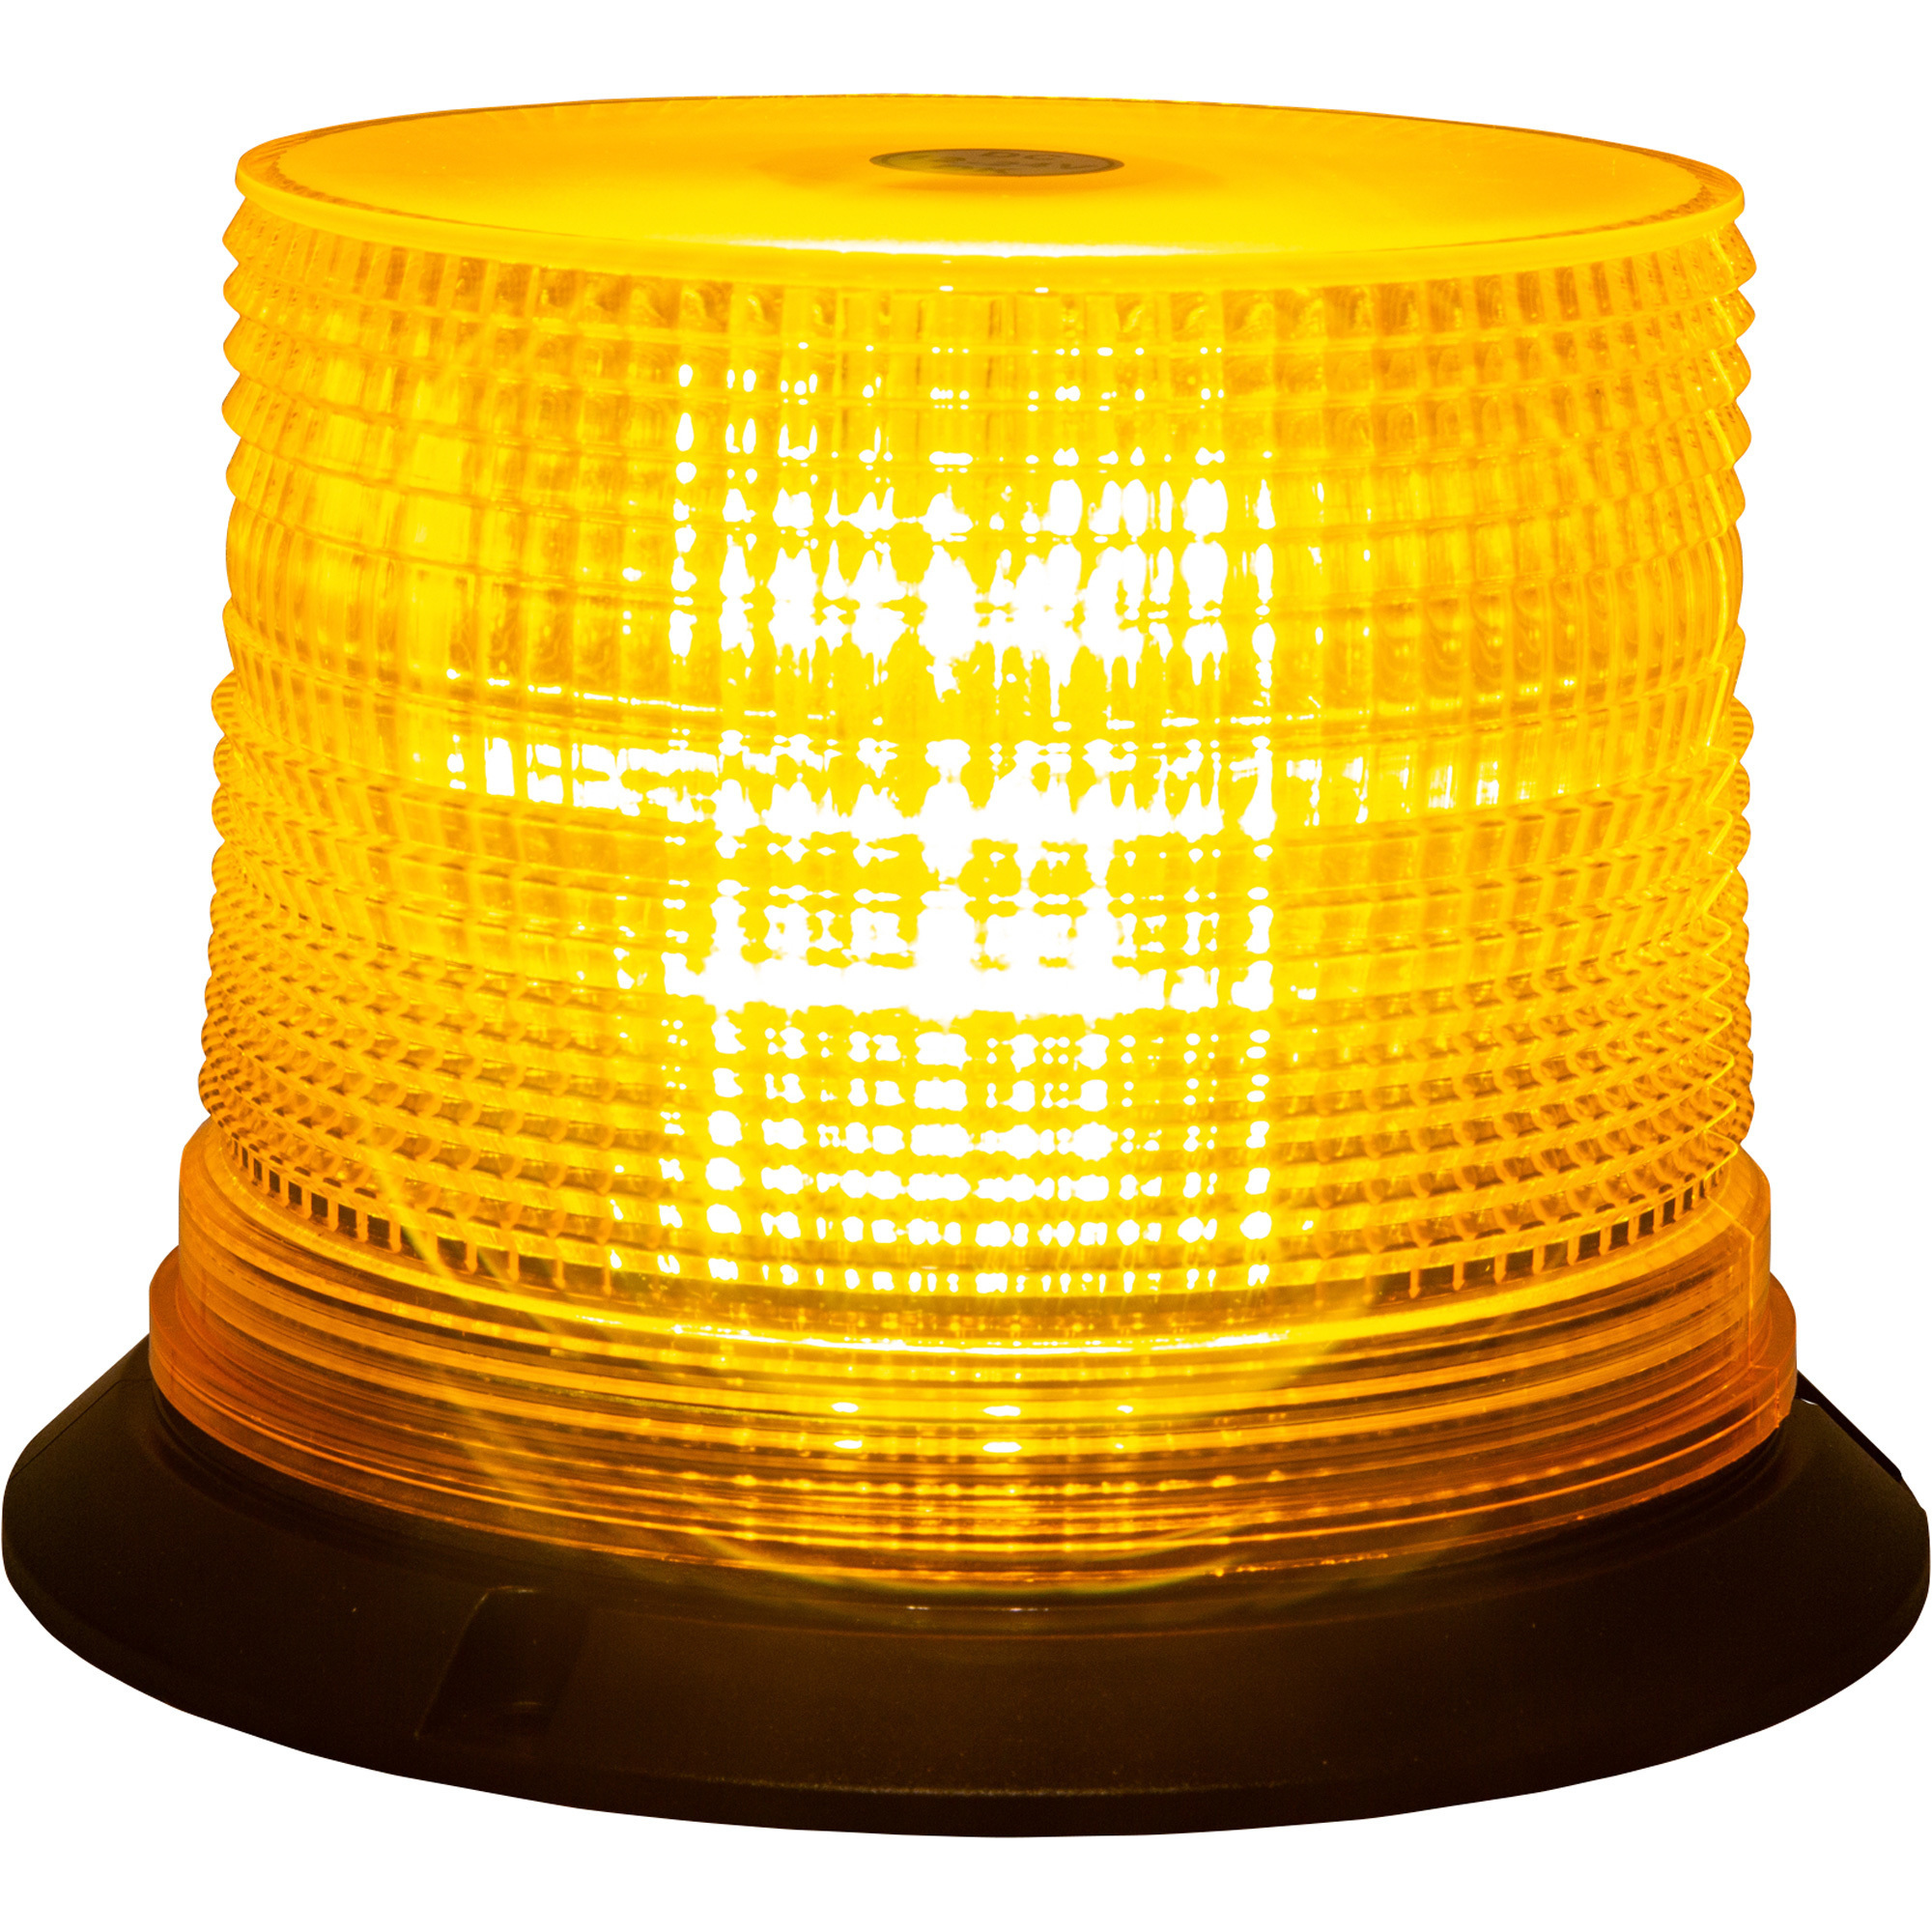 Buyers Products Class 1 LED Beacon Light, Amber 6.25Inch L x 6Inch W x 5Inch H, Model SL645ALP